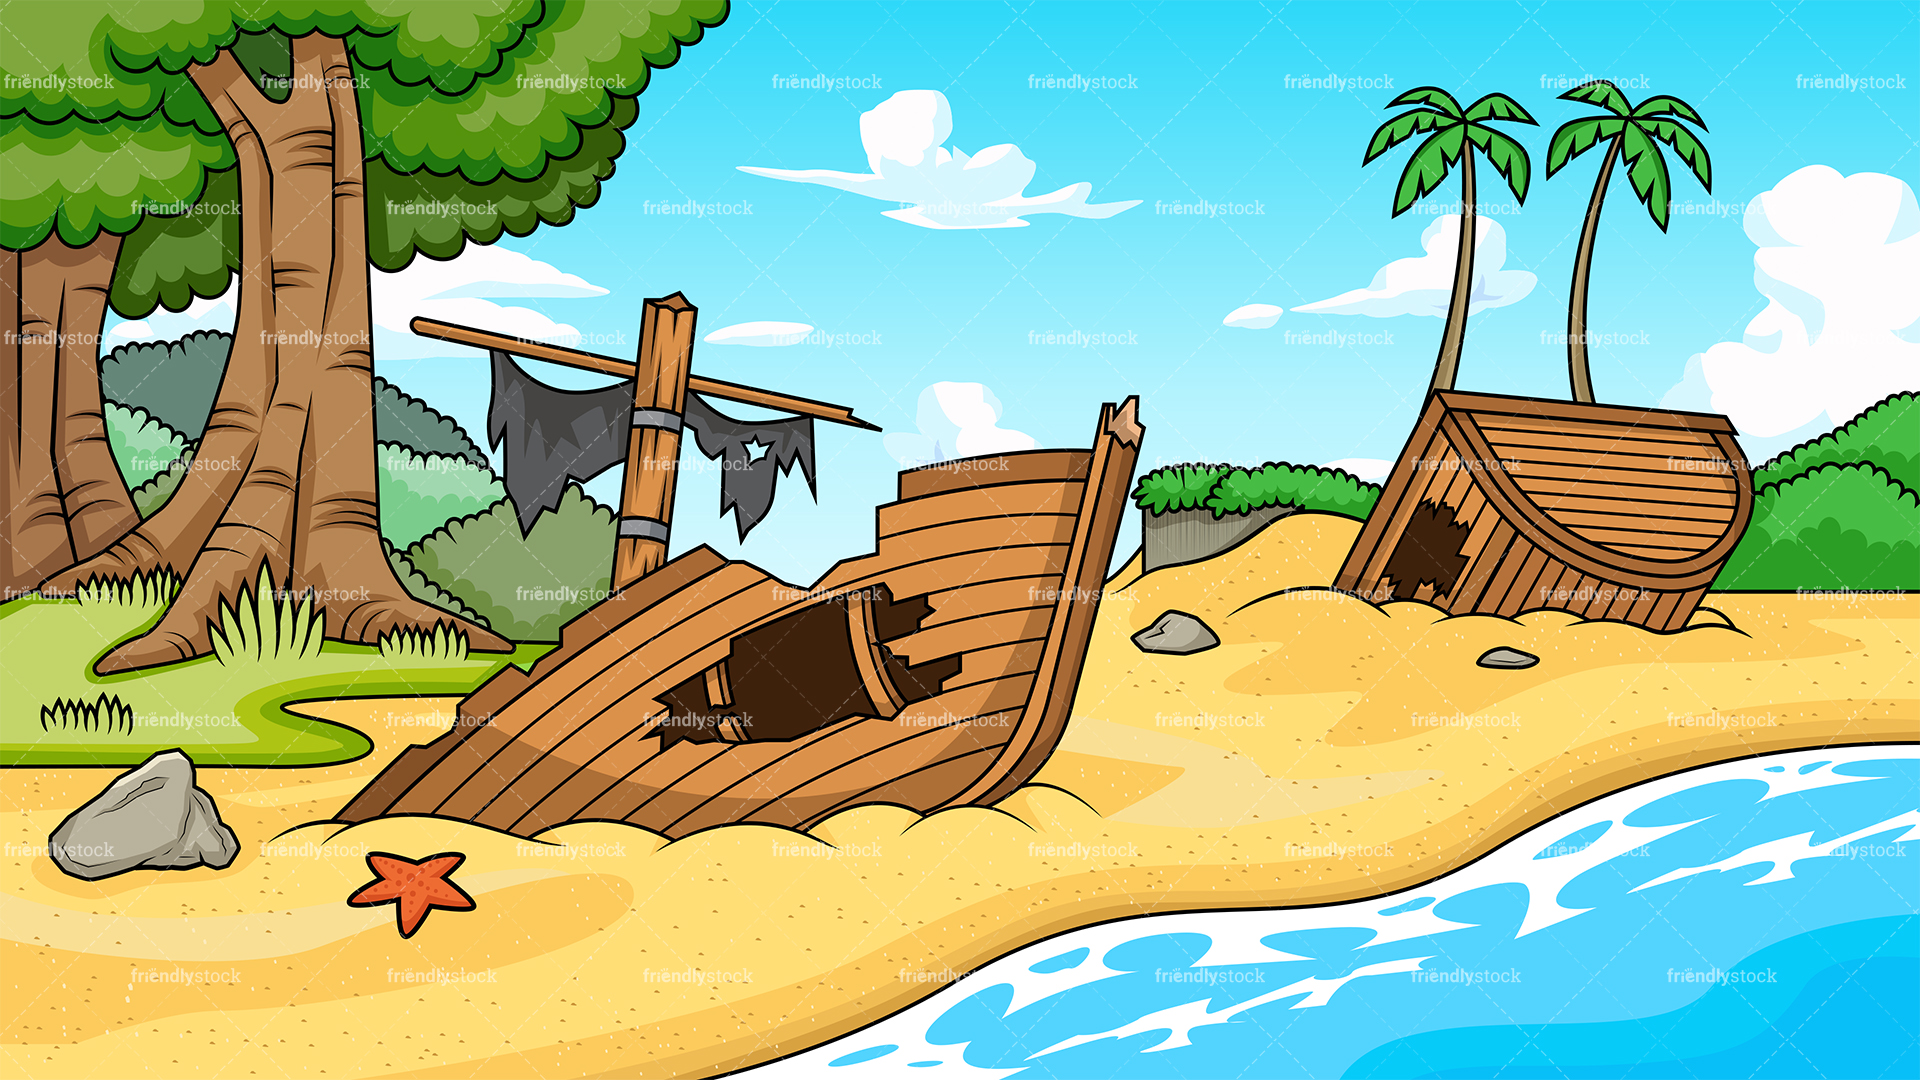 The best free Shipwreck vector images. Download from 32 free vectors of